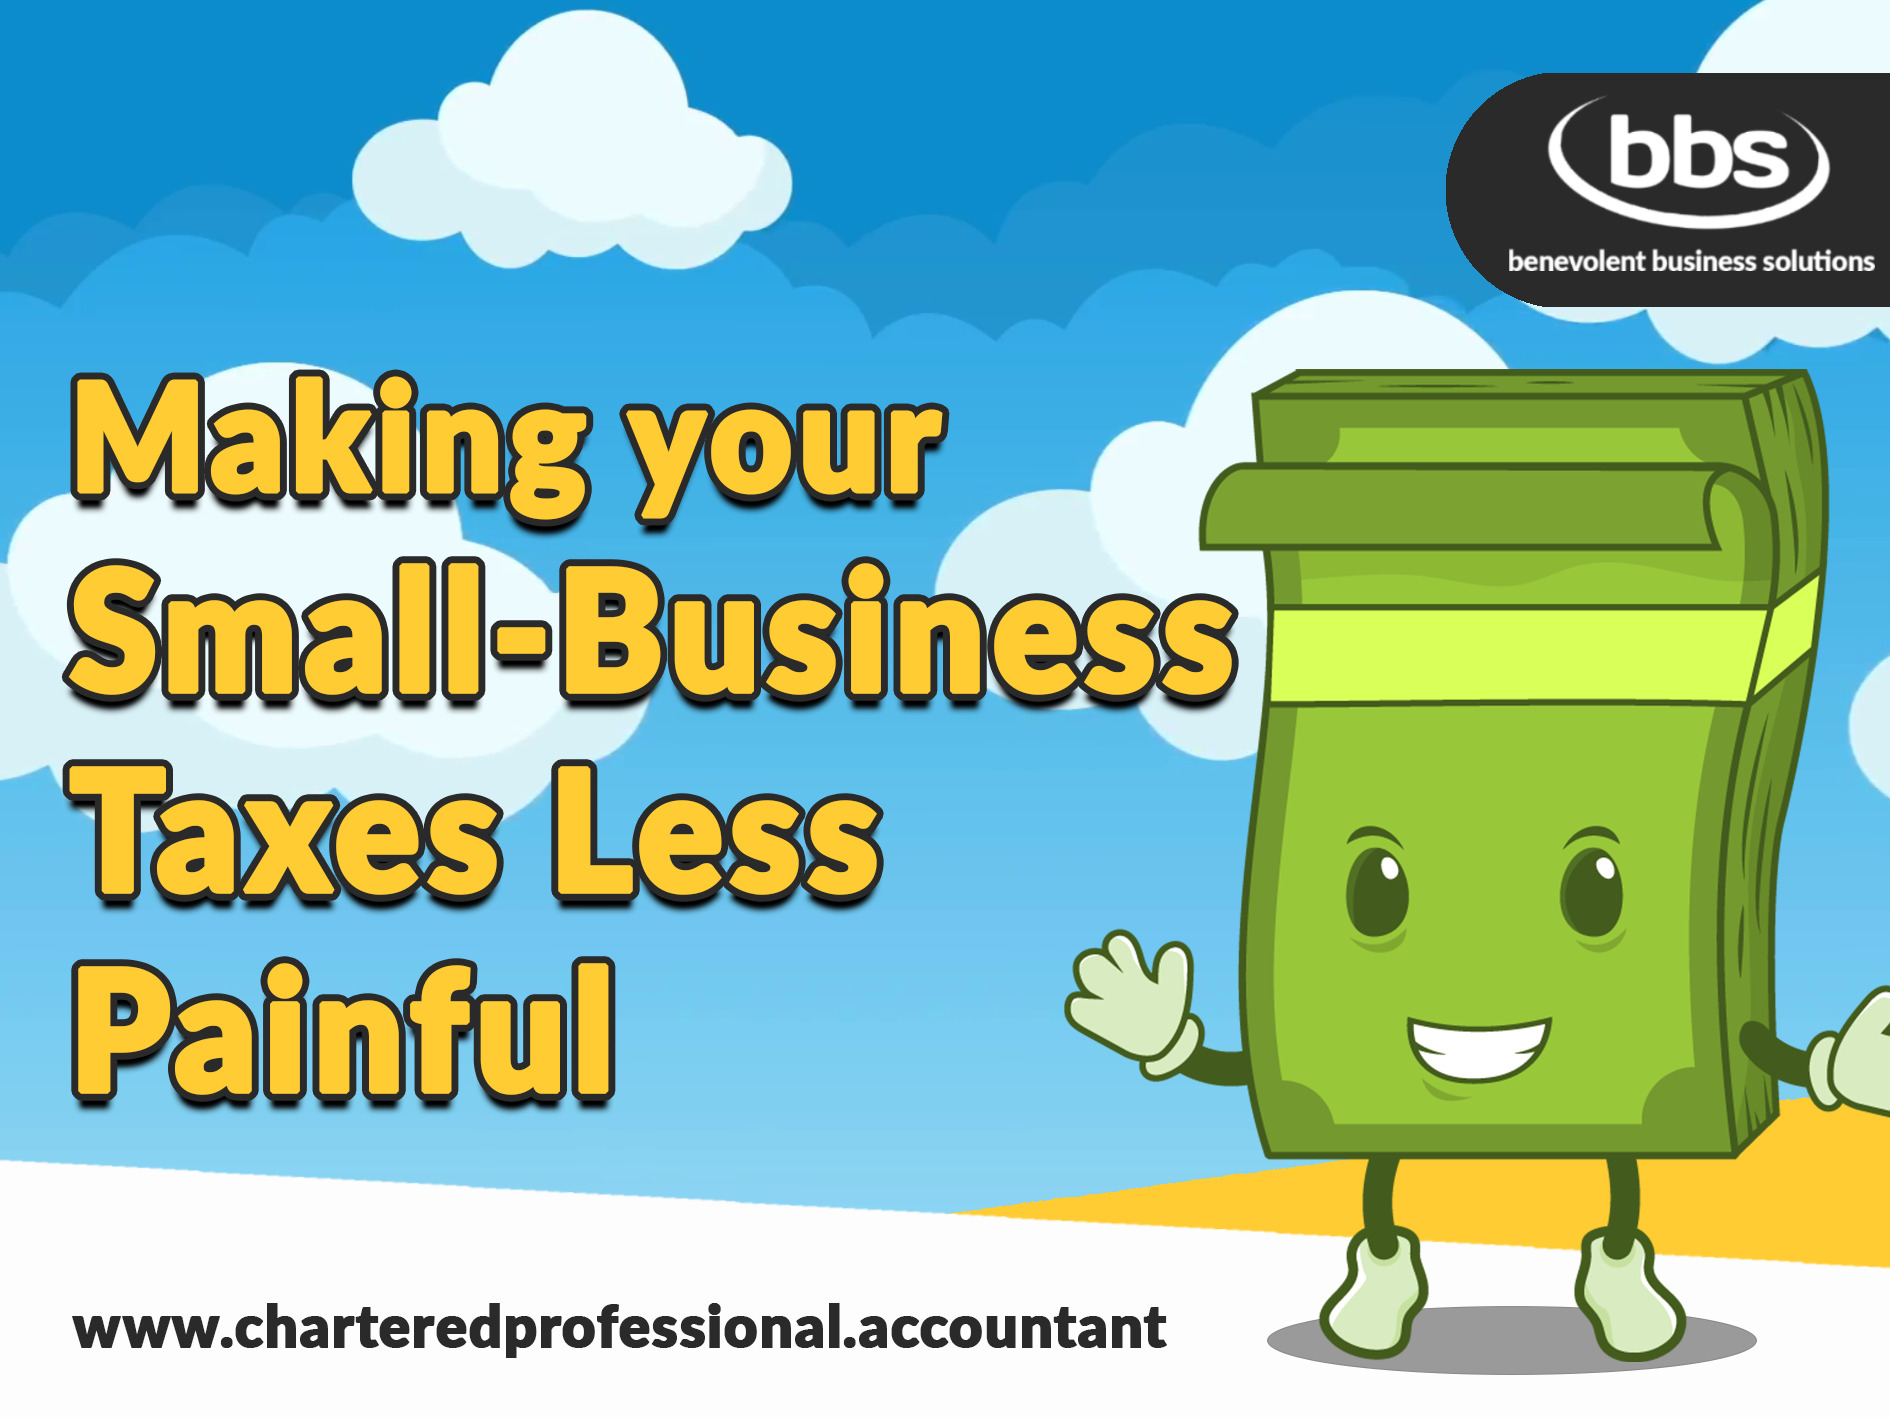 Five Ways Hiring an Accountant Can Make Filing Your Small-Business Taxes Less Painful